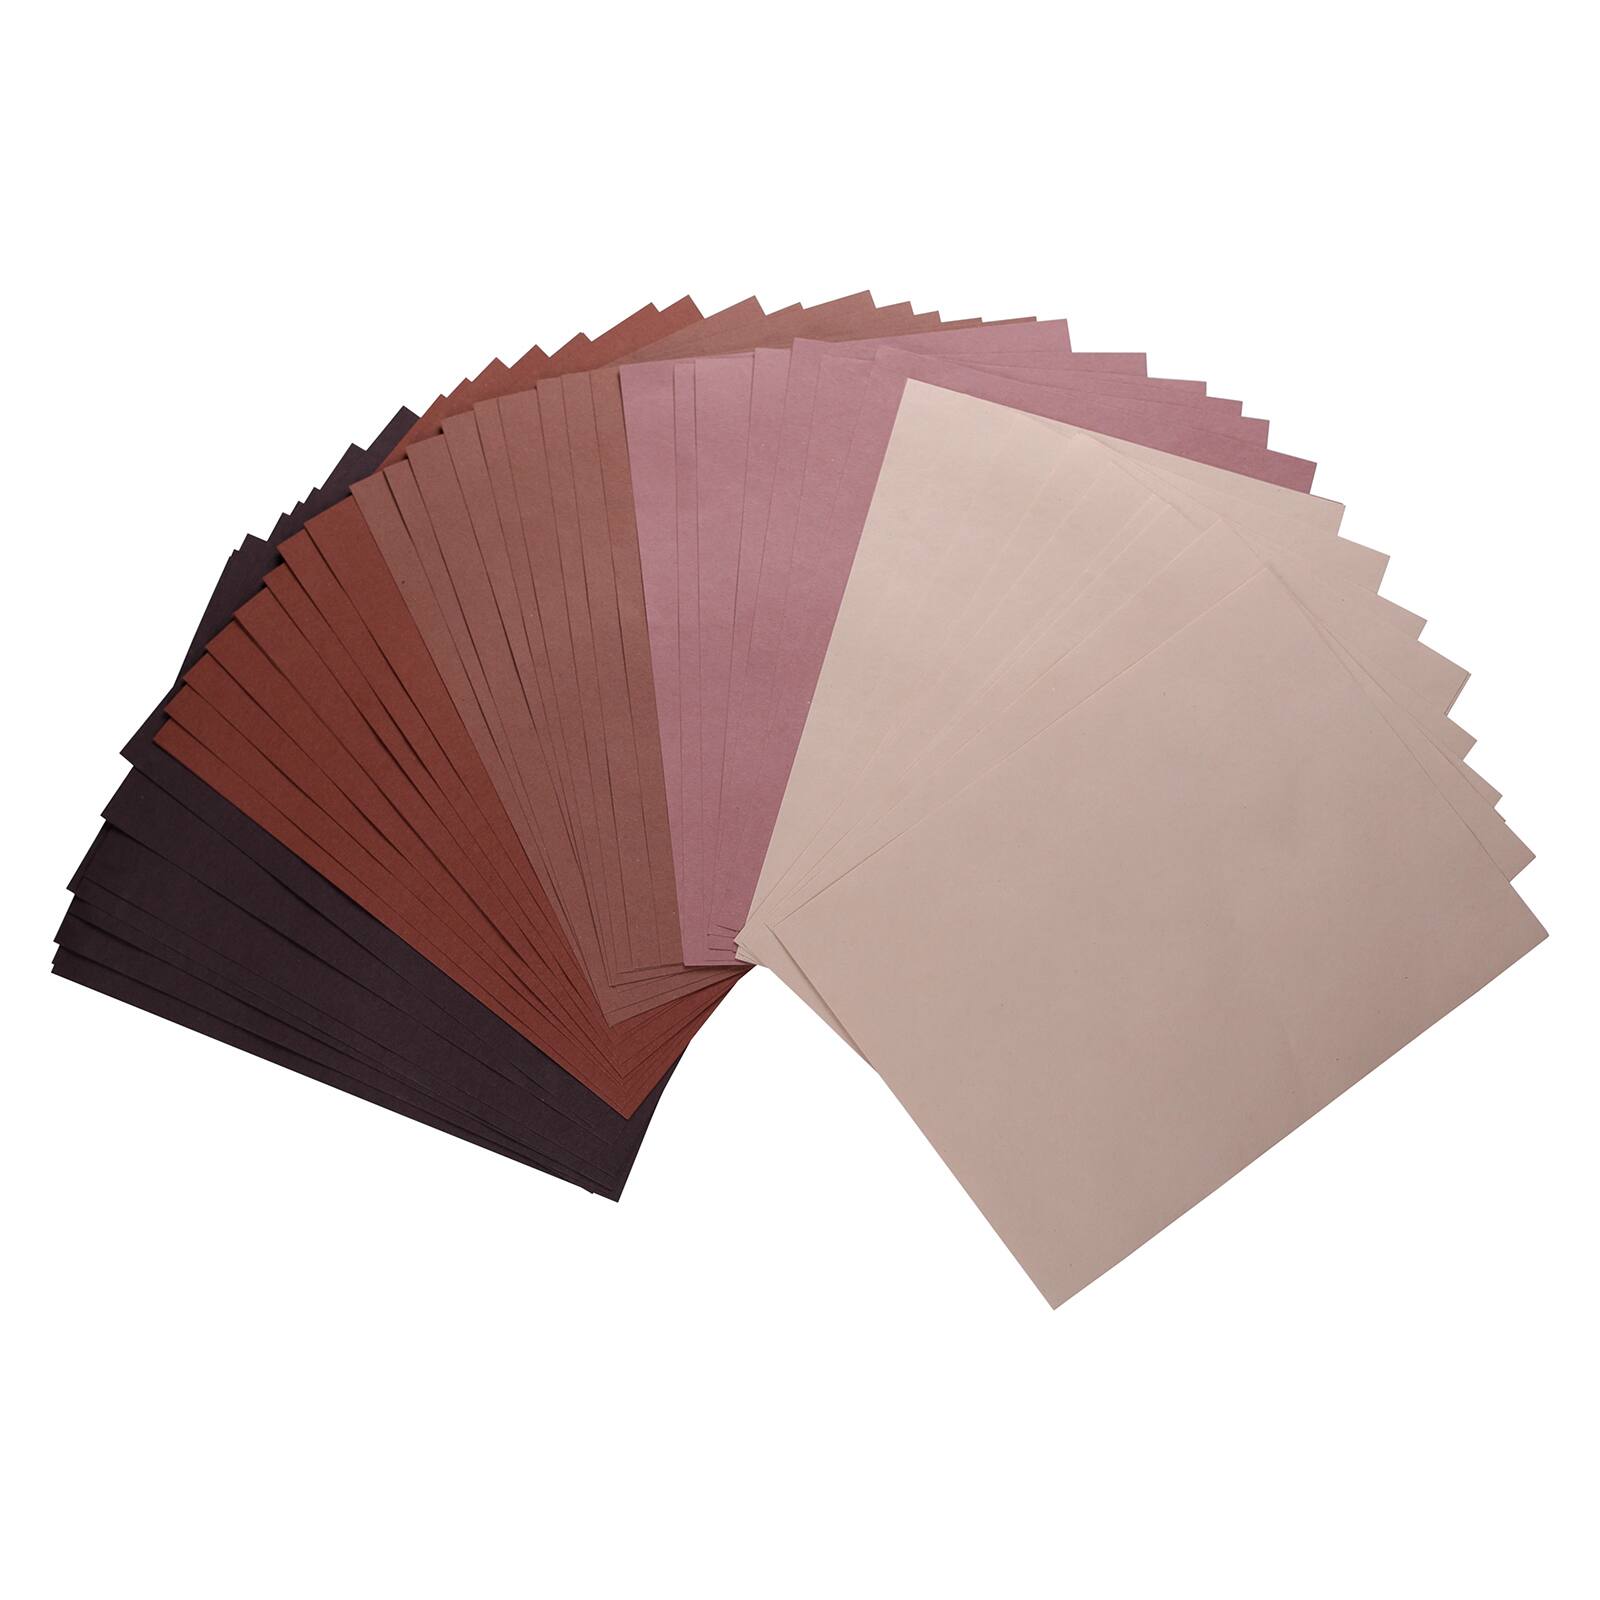 12 Packs: 50 ct. (600 total) Skin Tone 9 x 12 Construction Paper